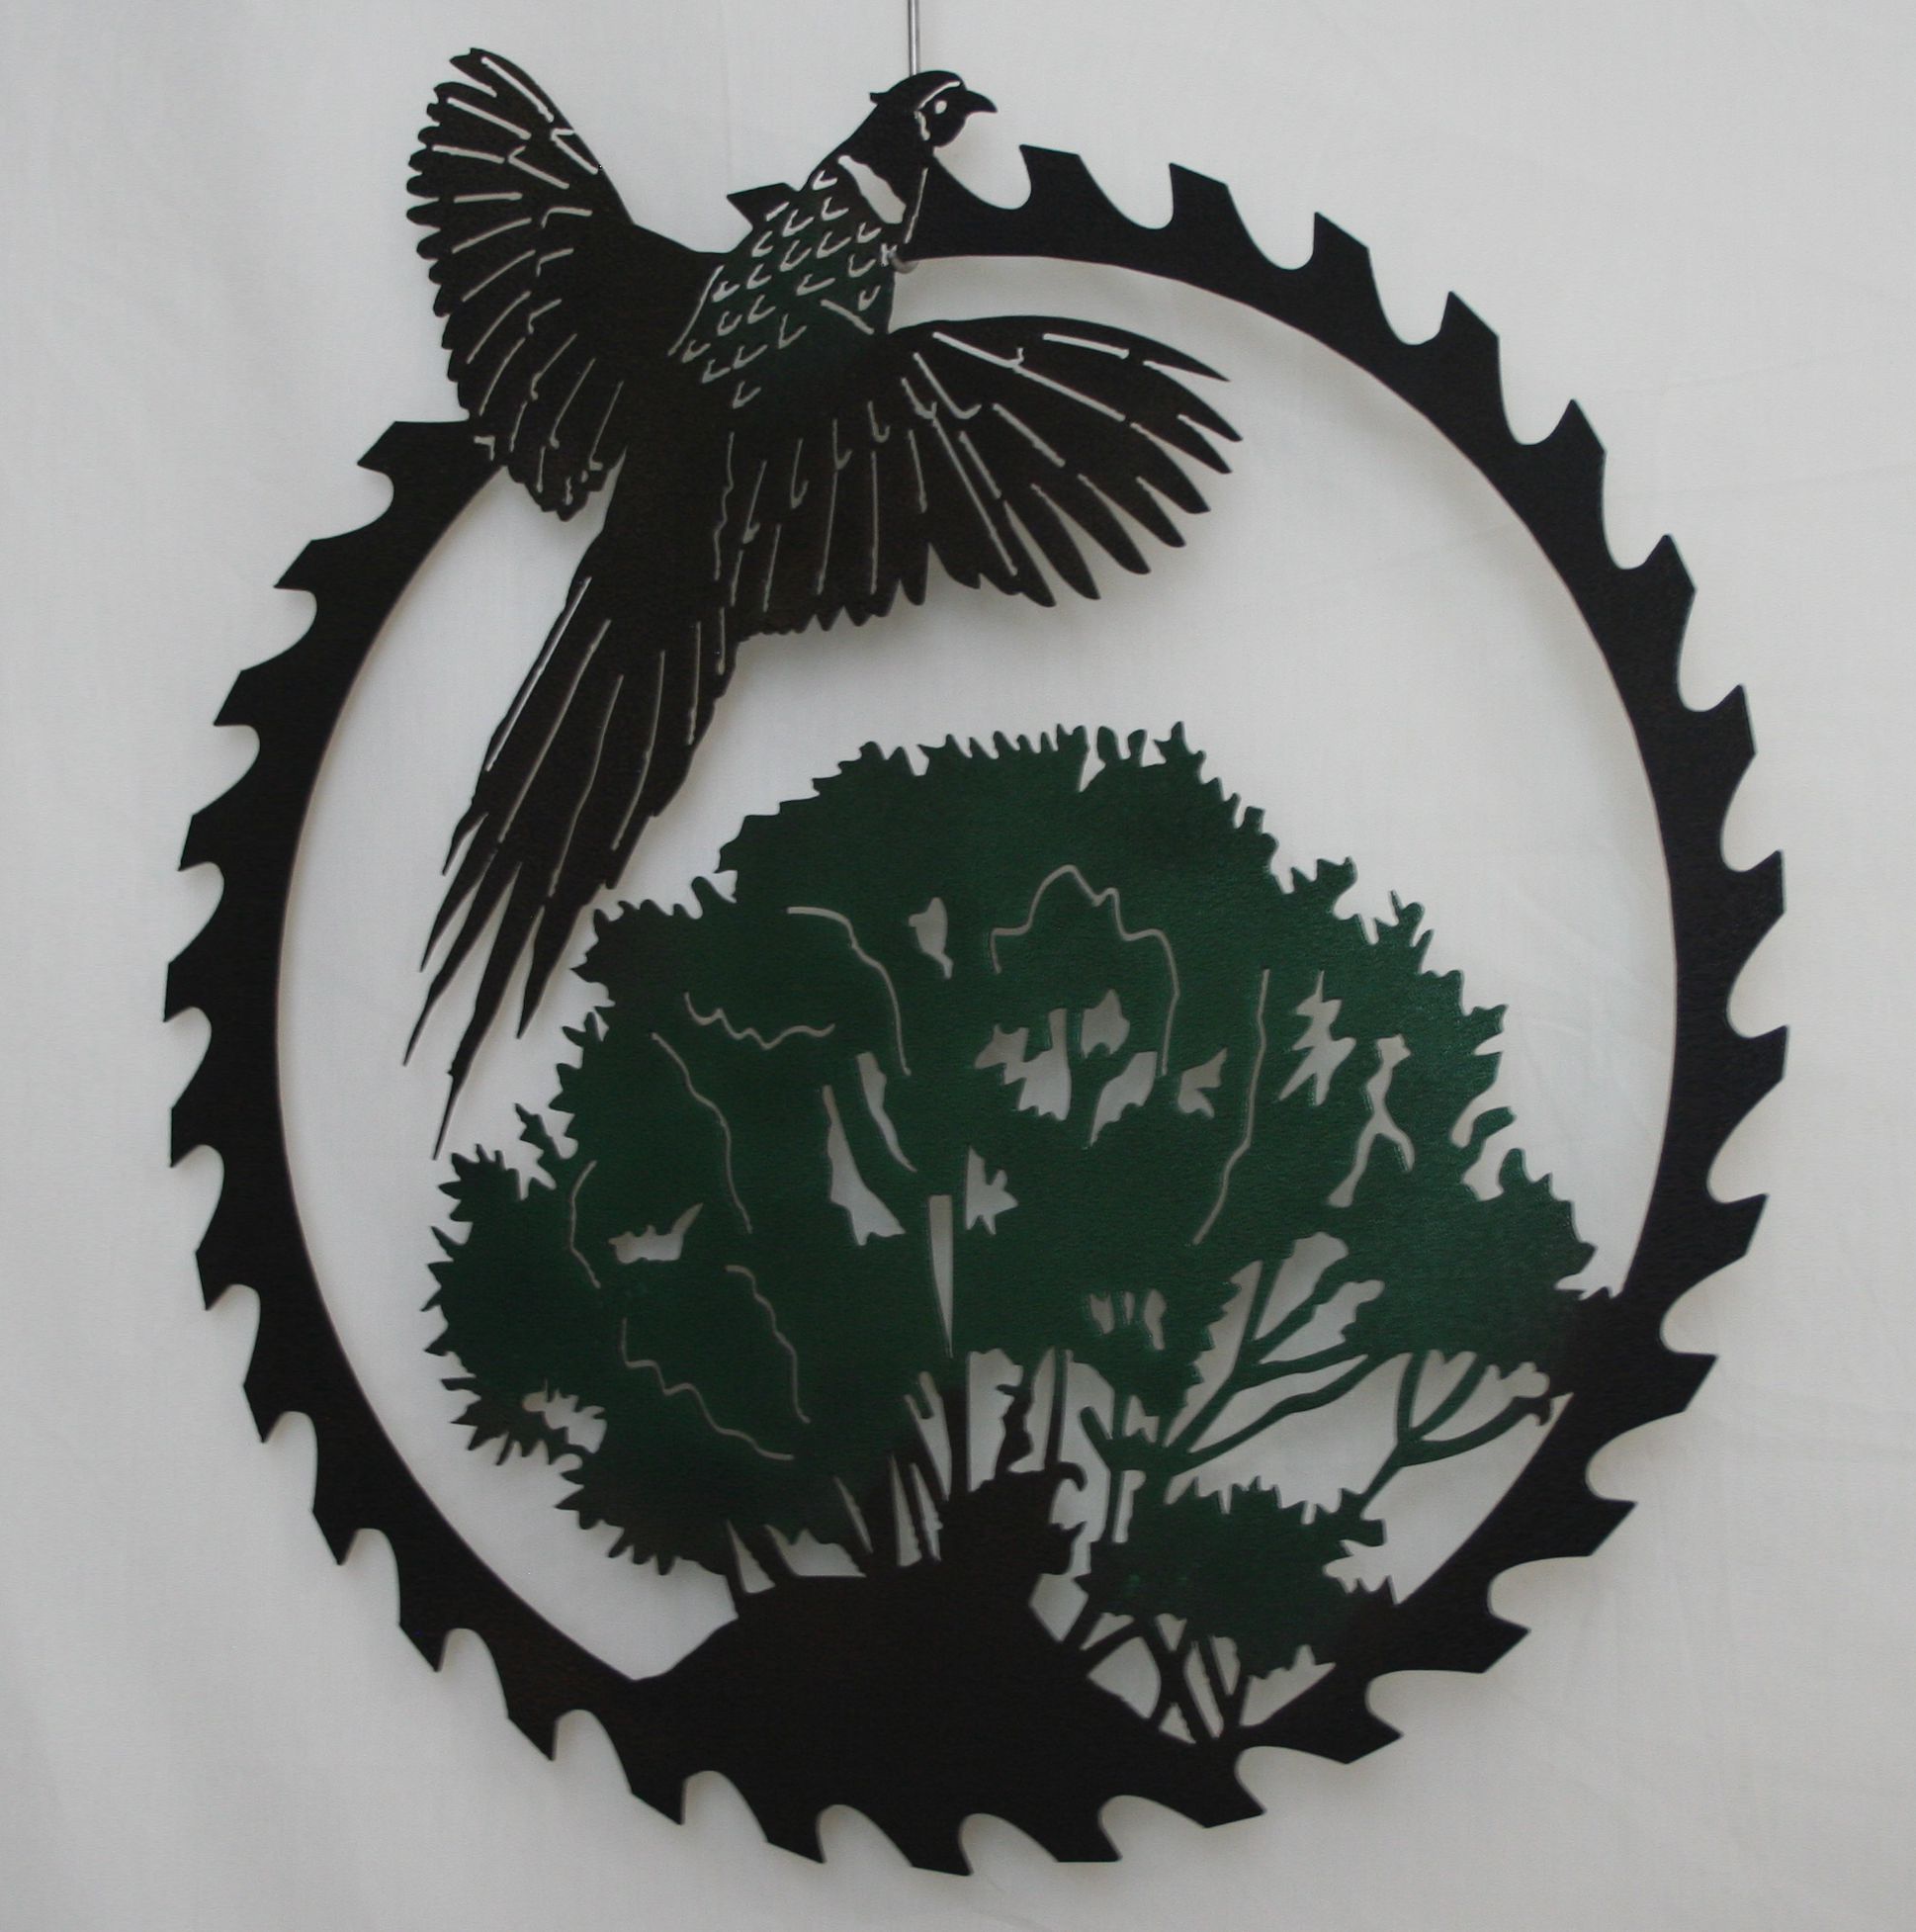 Metal Art, Round, Saw, Blade, Flying Ring Neck Pheasant, Tree, Woods, Grass, Hill, Bushes